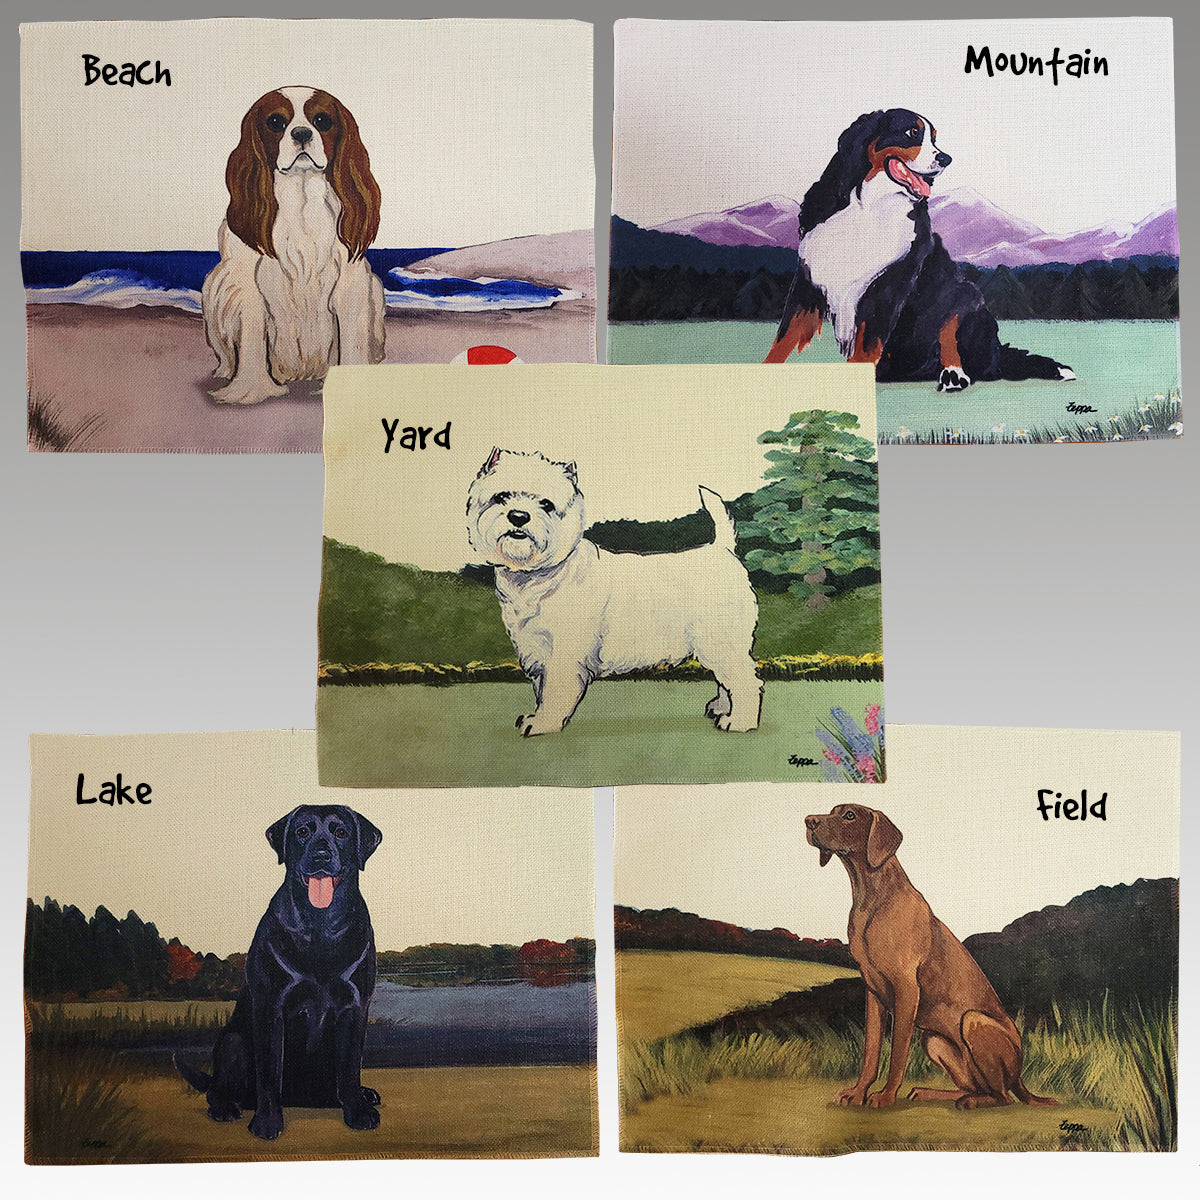 Lakeland Terrier Scenic Placemats